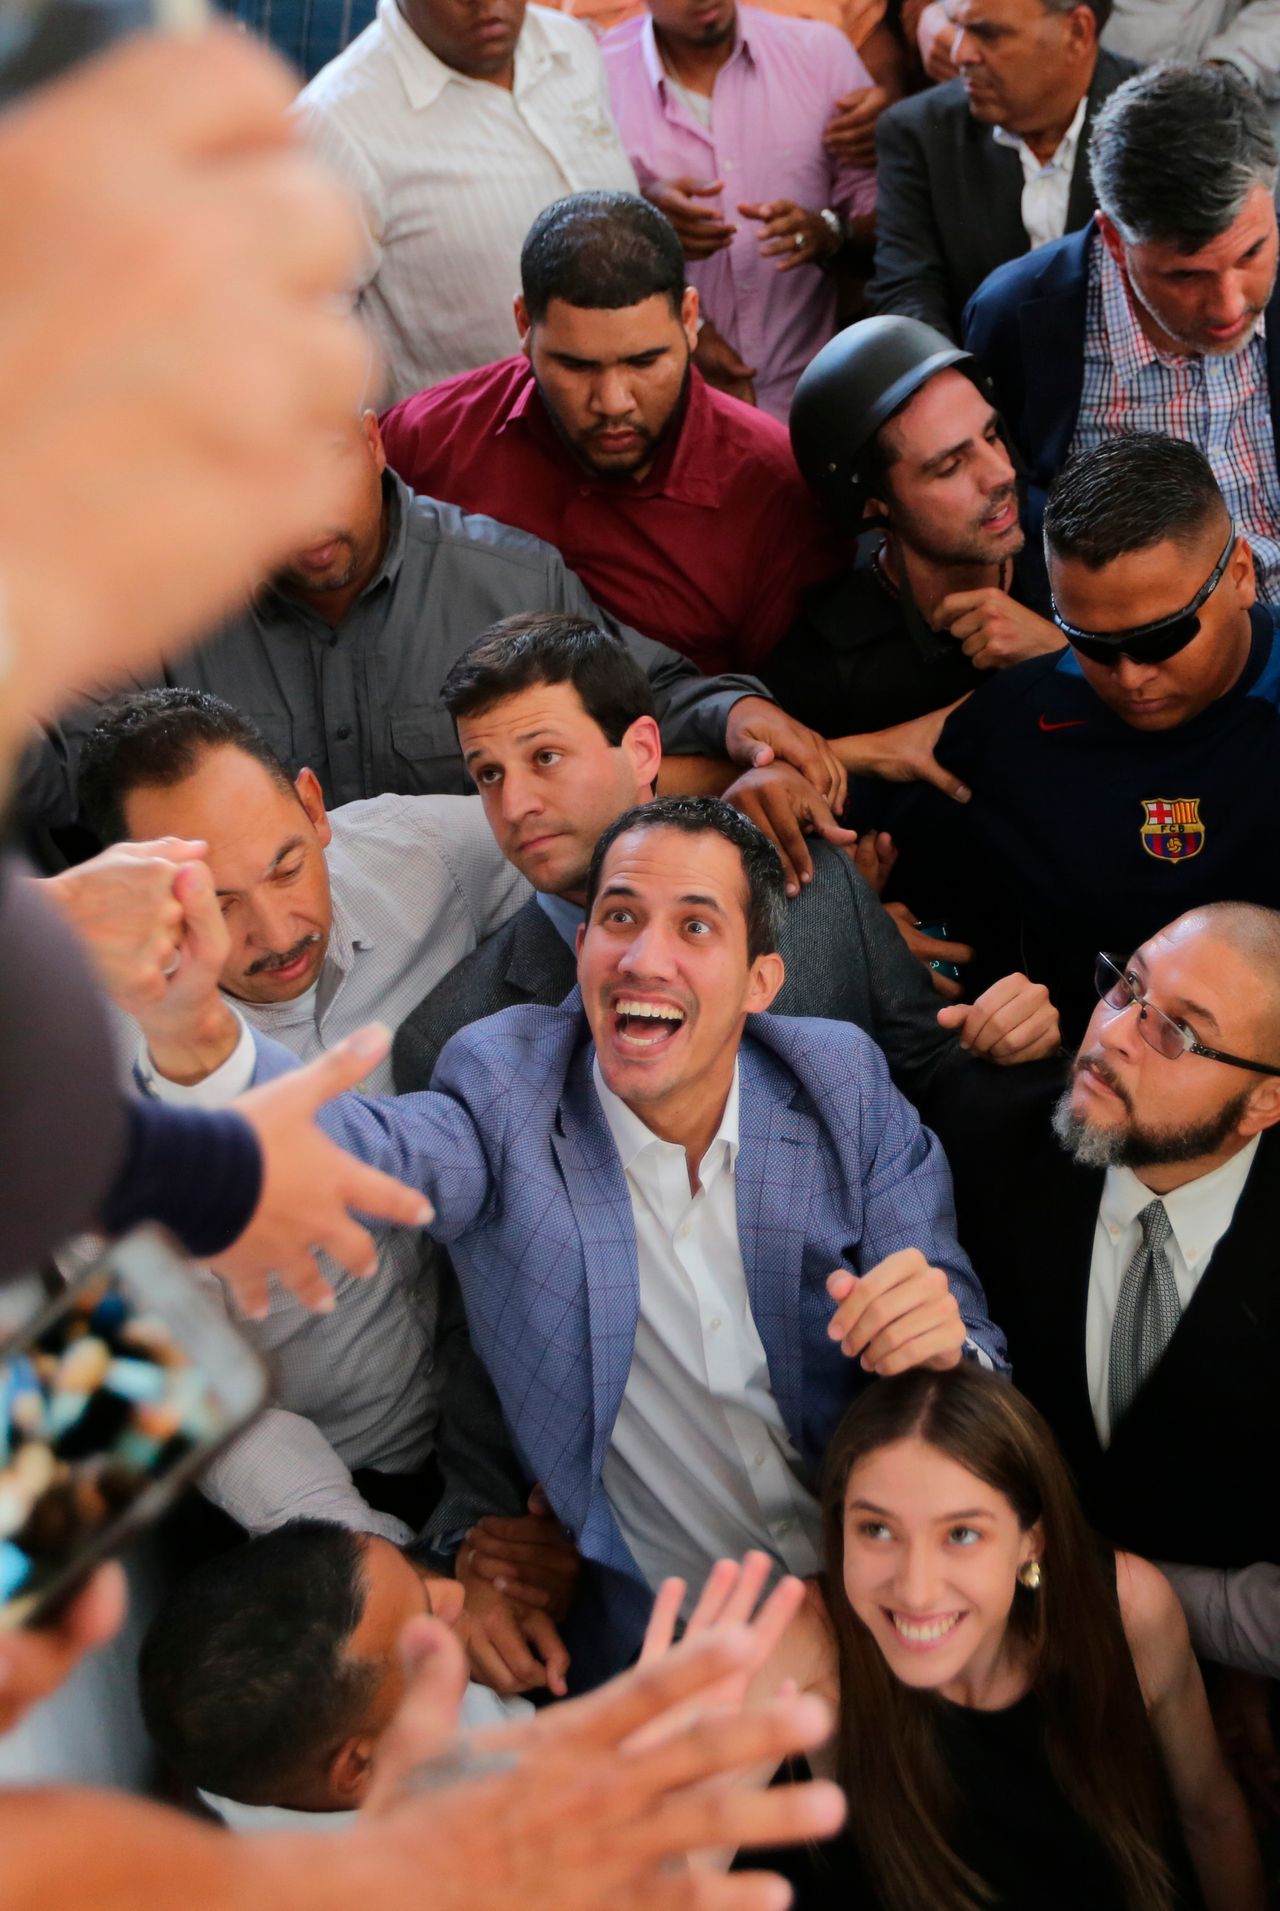 Venezuelan National Assembly President Juan Guaidó greets supporters in the Hatillo municipality of Caracas, Venezuela, on March 14, 2019. Guaidó has declared himself interim president and demands new elections, arguing that President Nicolás Maduro's re-election last year was invalid.